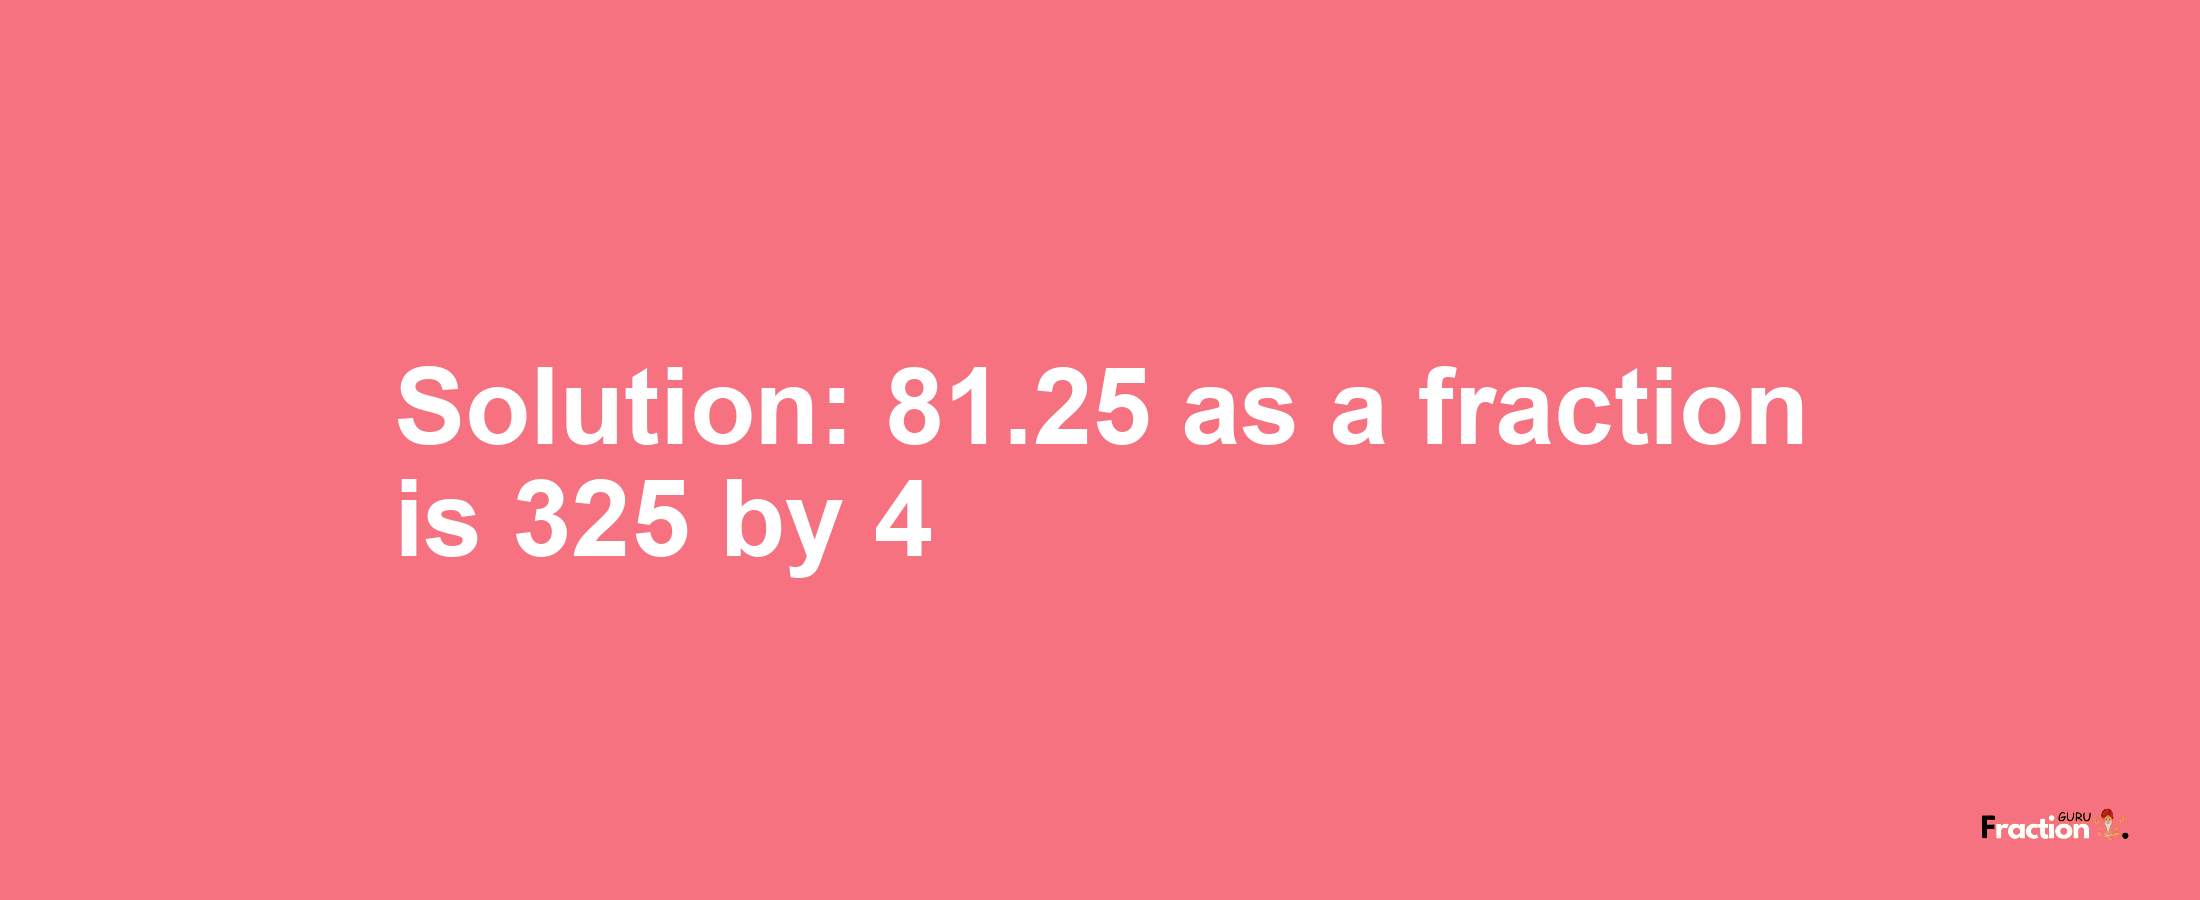 Solution:81.25 as a fraction is 325/4